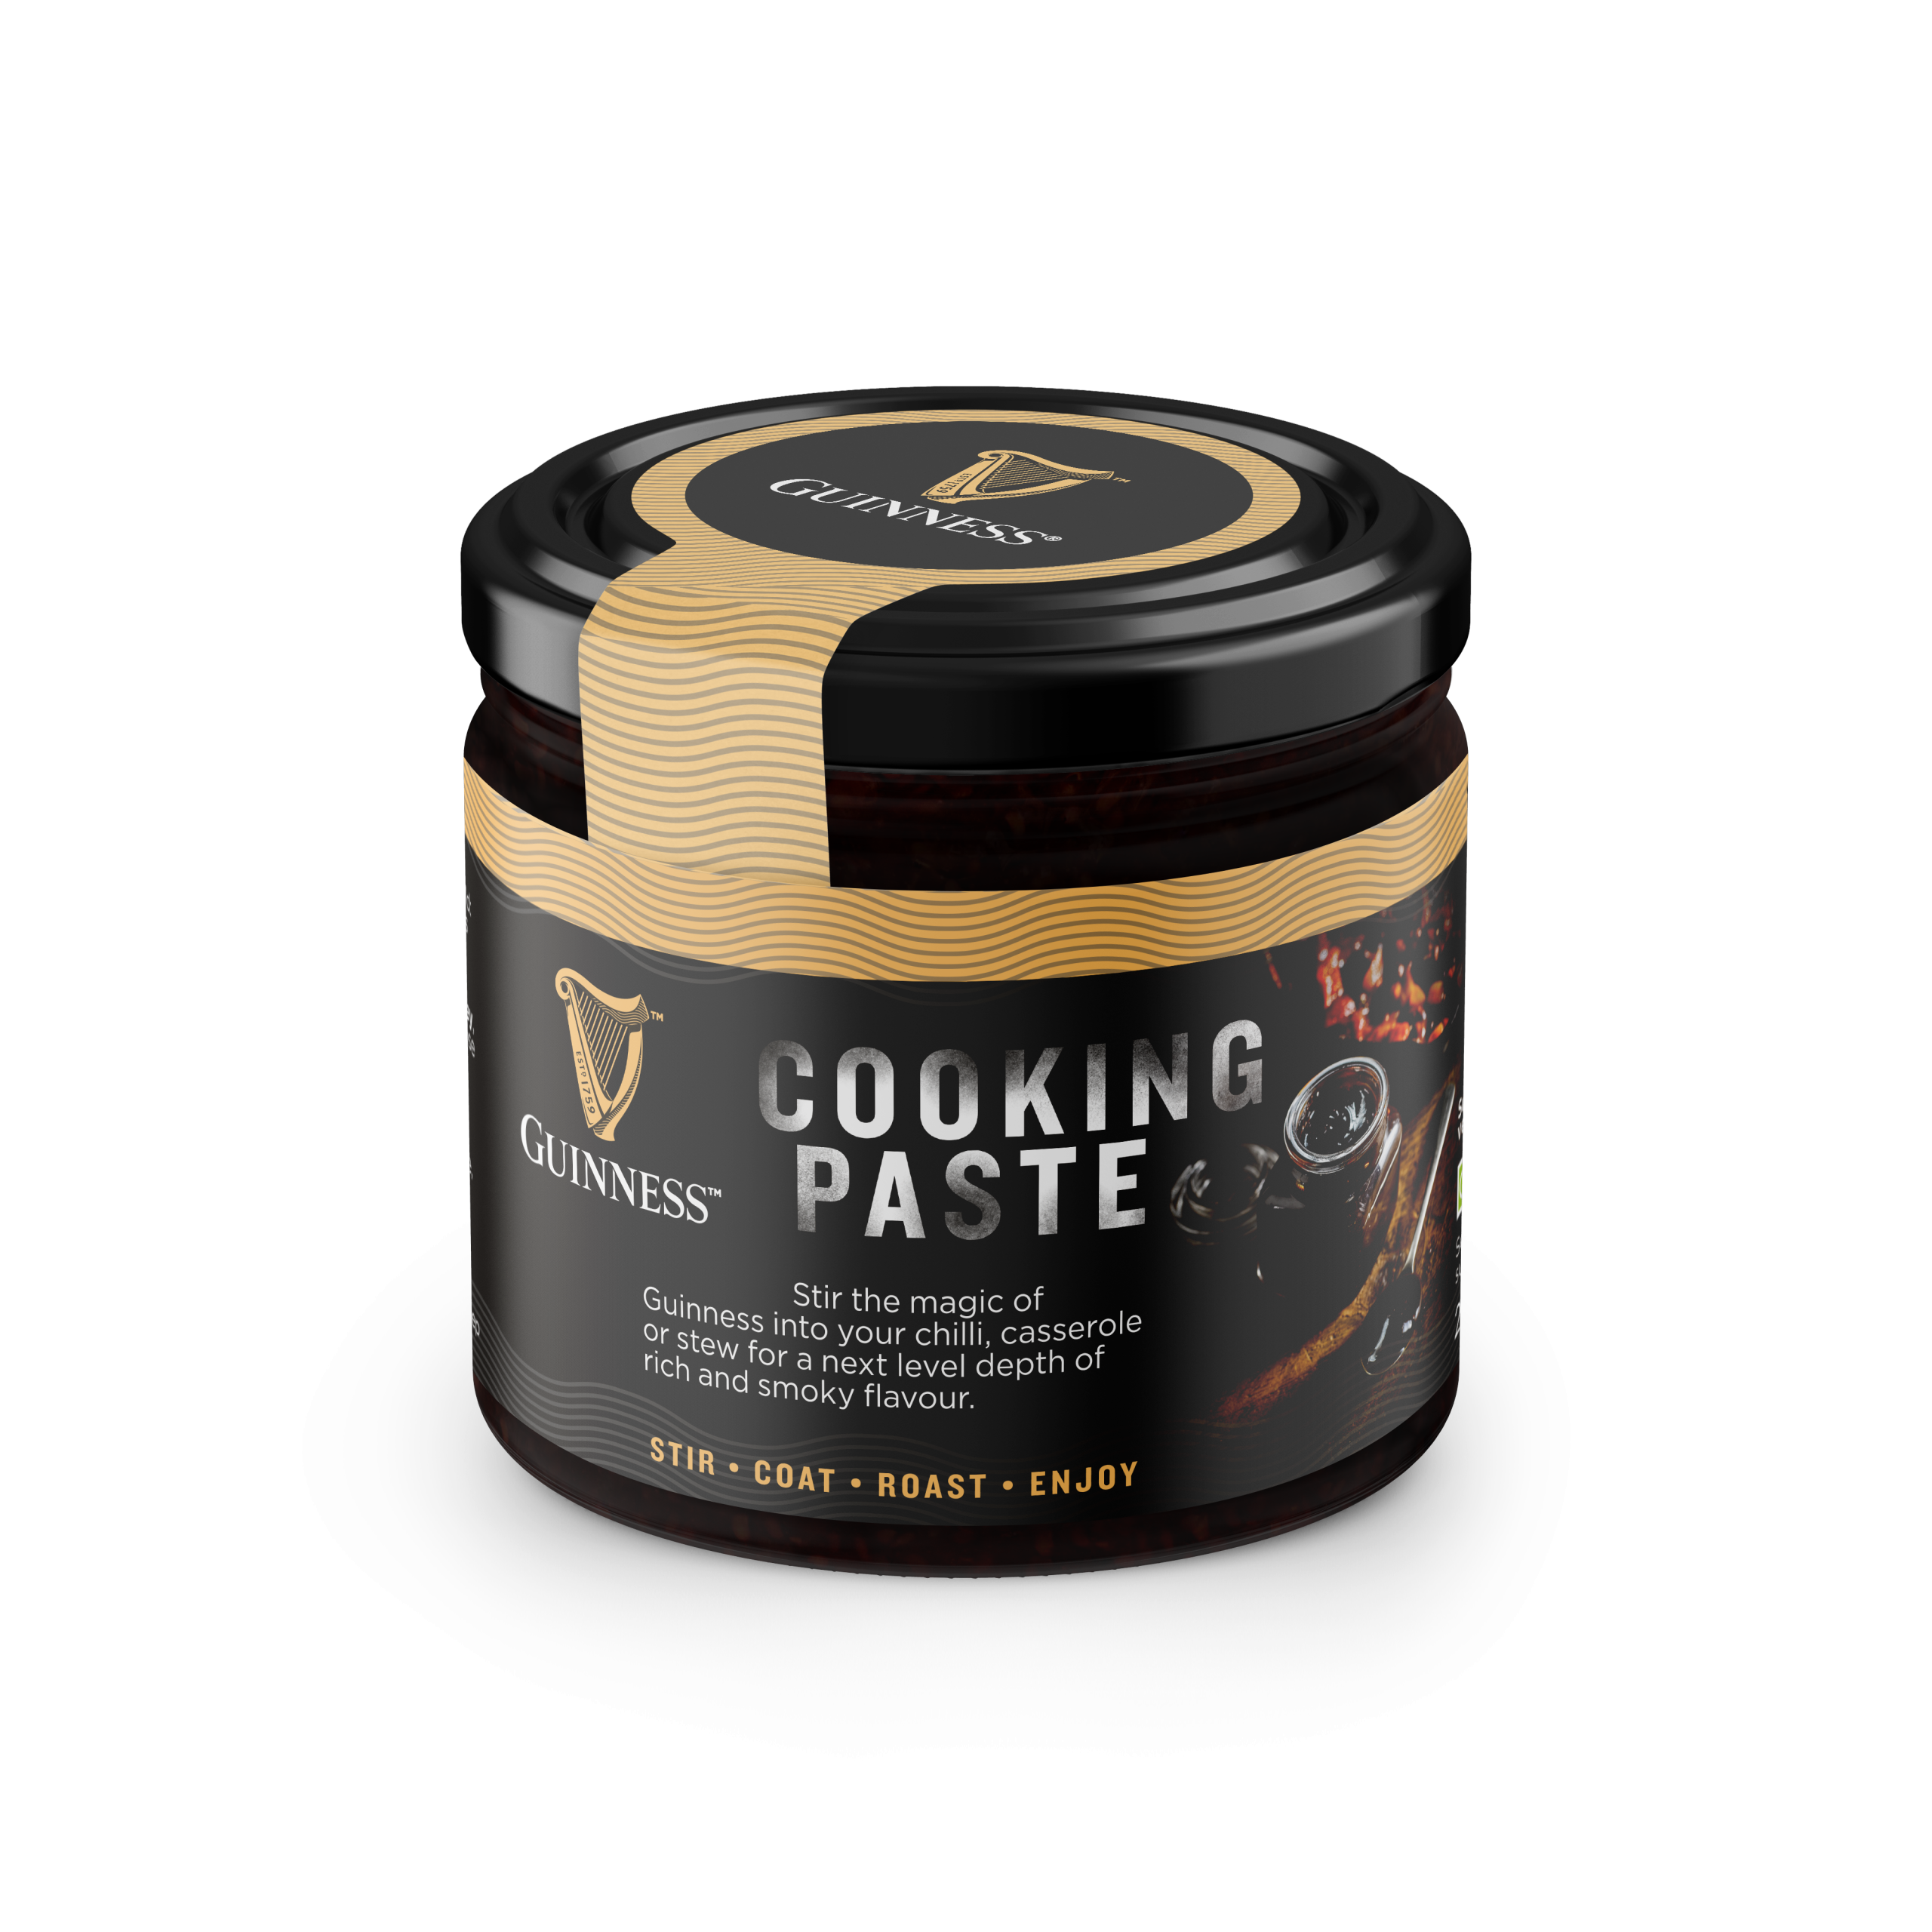 The Flava People launches ‘Guinness Cooking Paste’